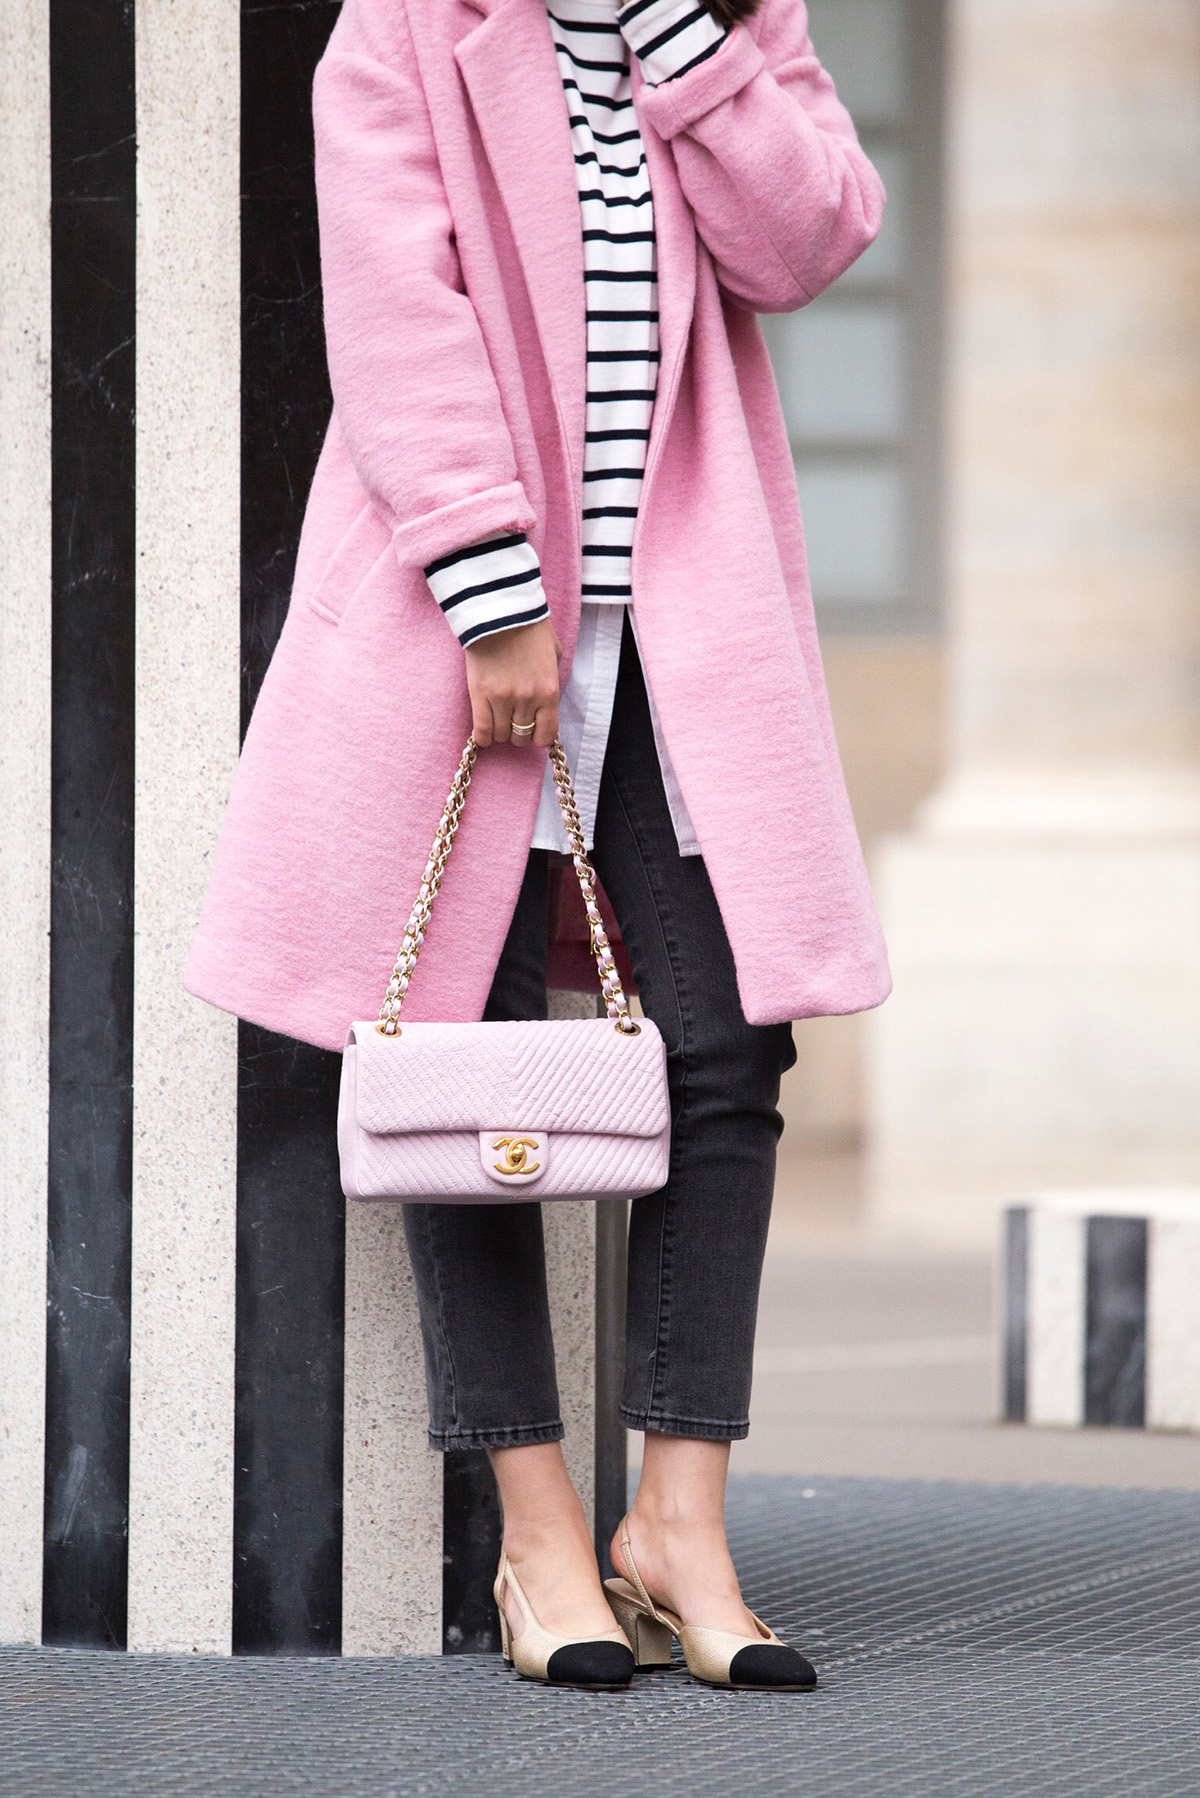 Chanel Pink Bag & Chanel Mules by Stella Asteria Fashion & Lifestyle Blogger